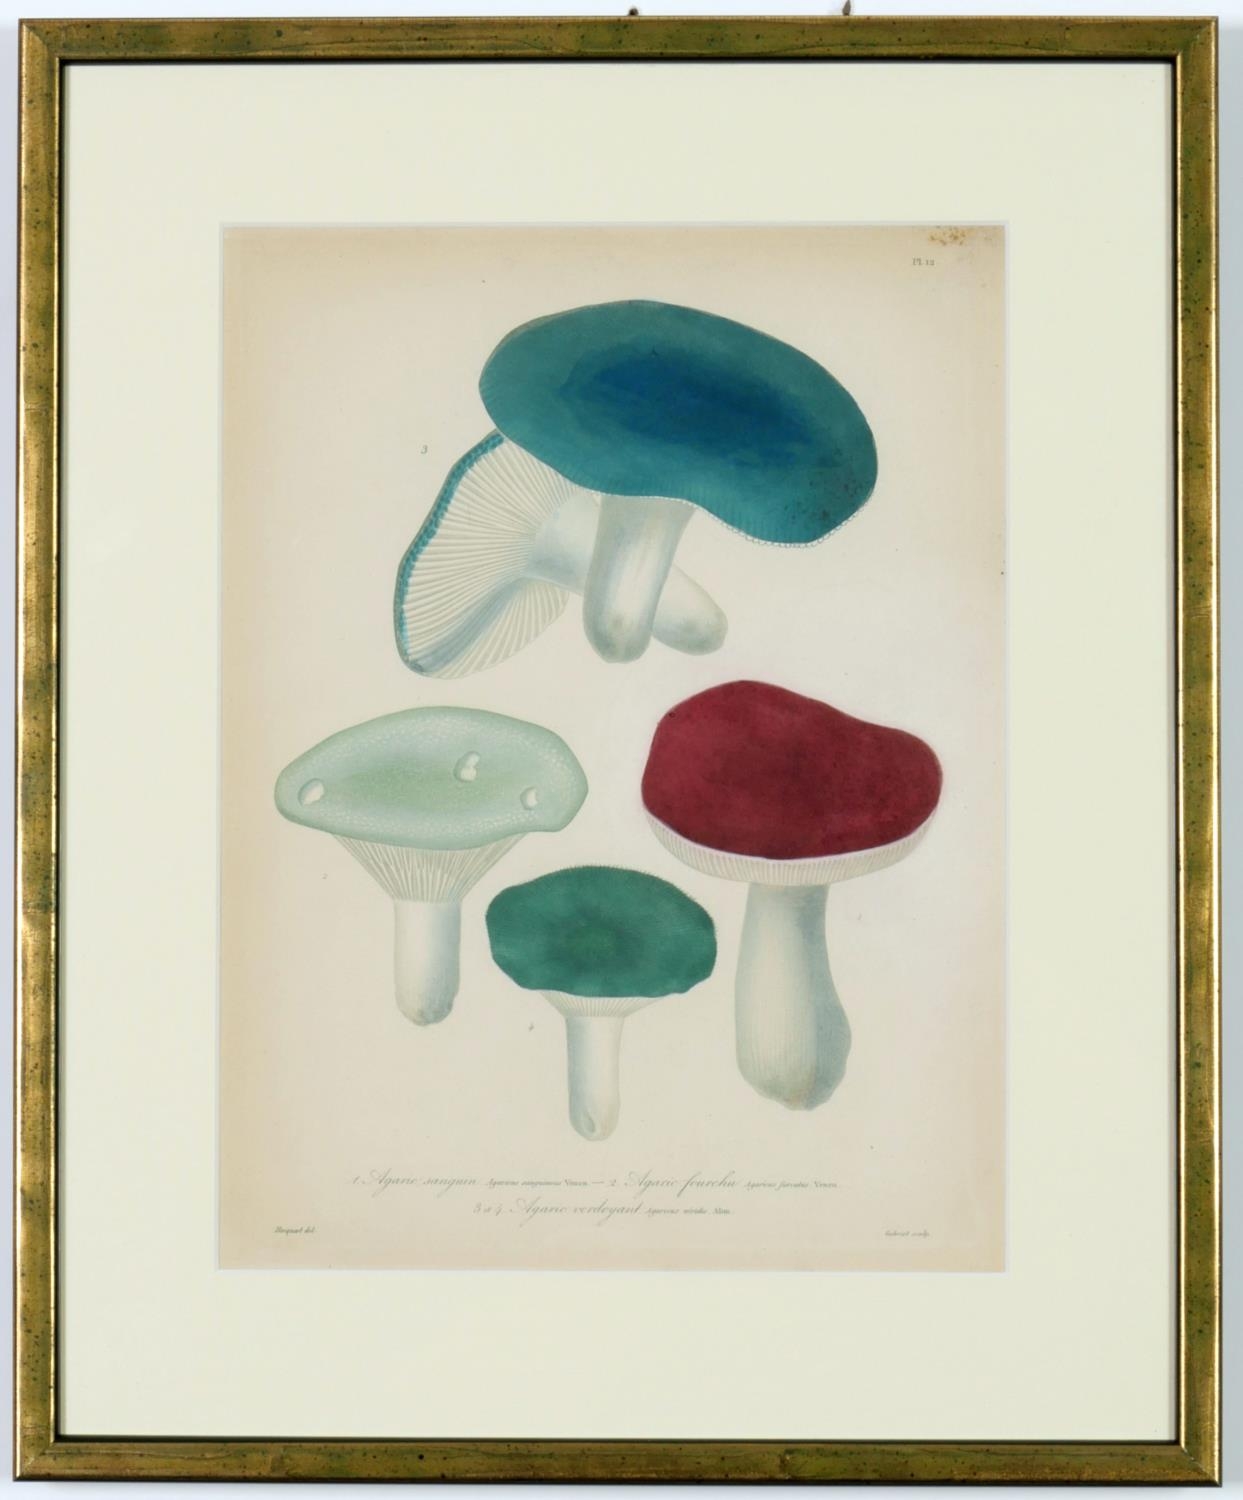 JOSEPH ROQUES, Mushrooms, a set of nine rare engravings with hand colouring, 1864, Victor Masson - Image 8 of 10